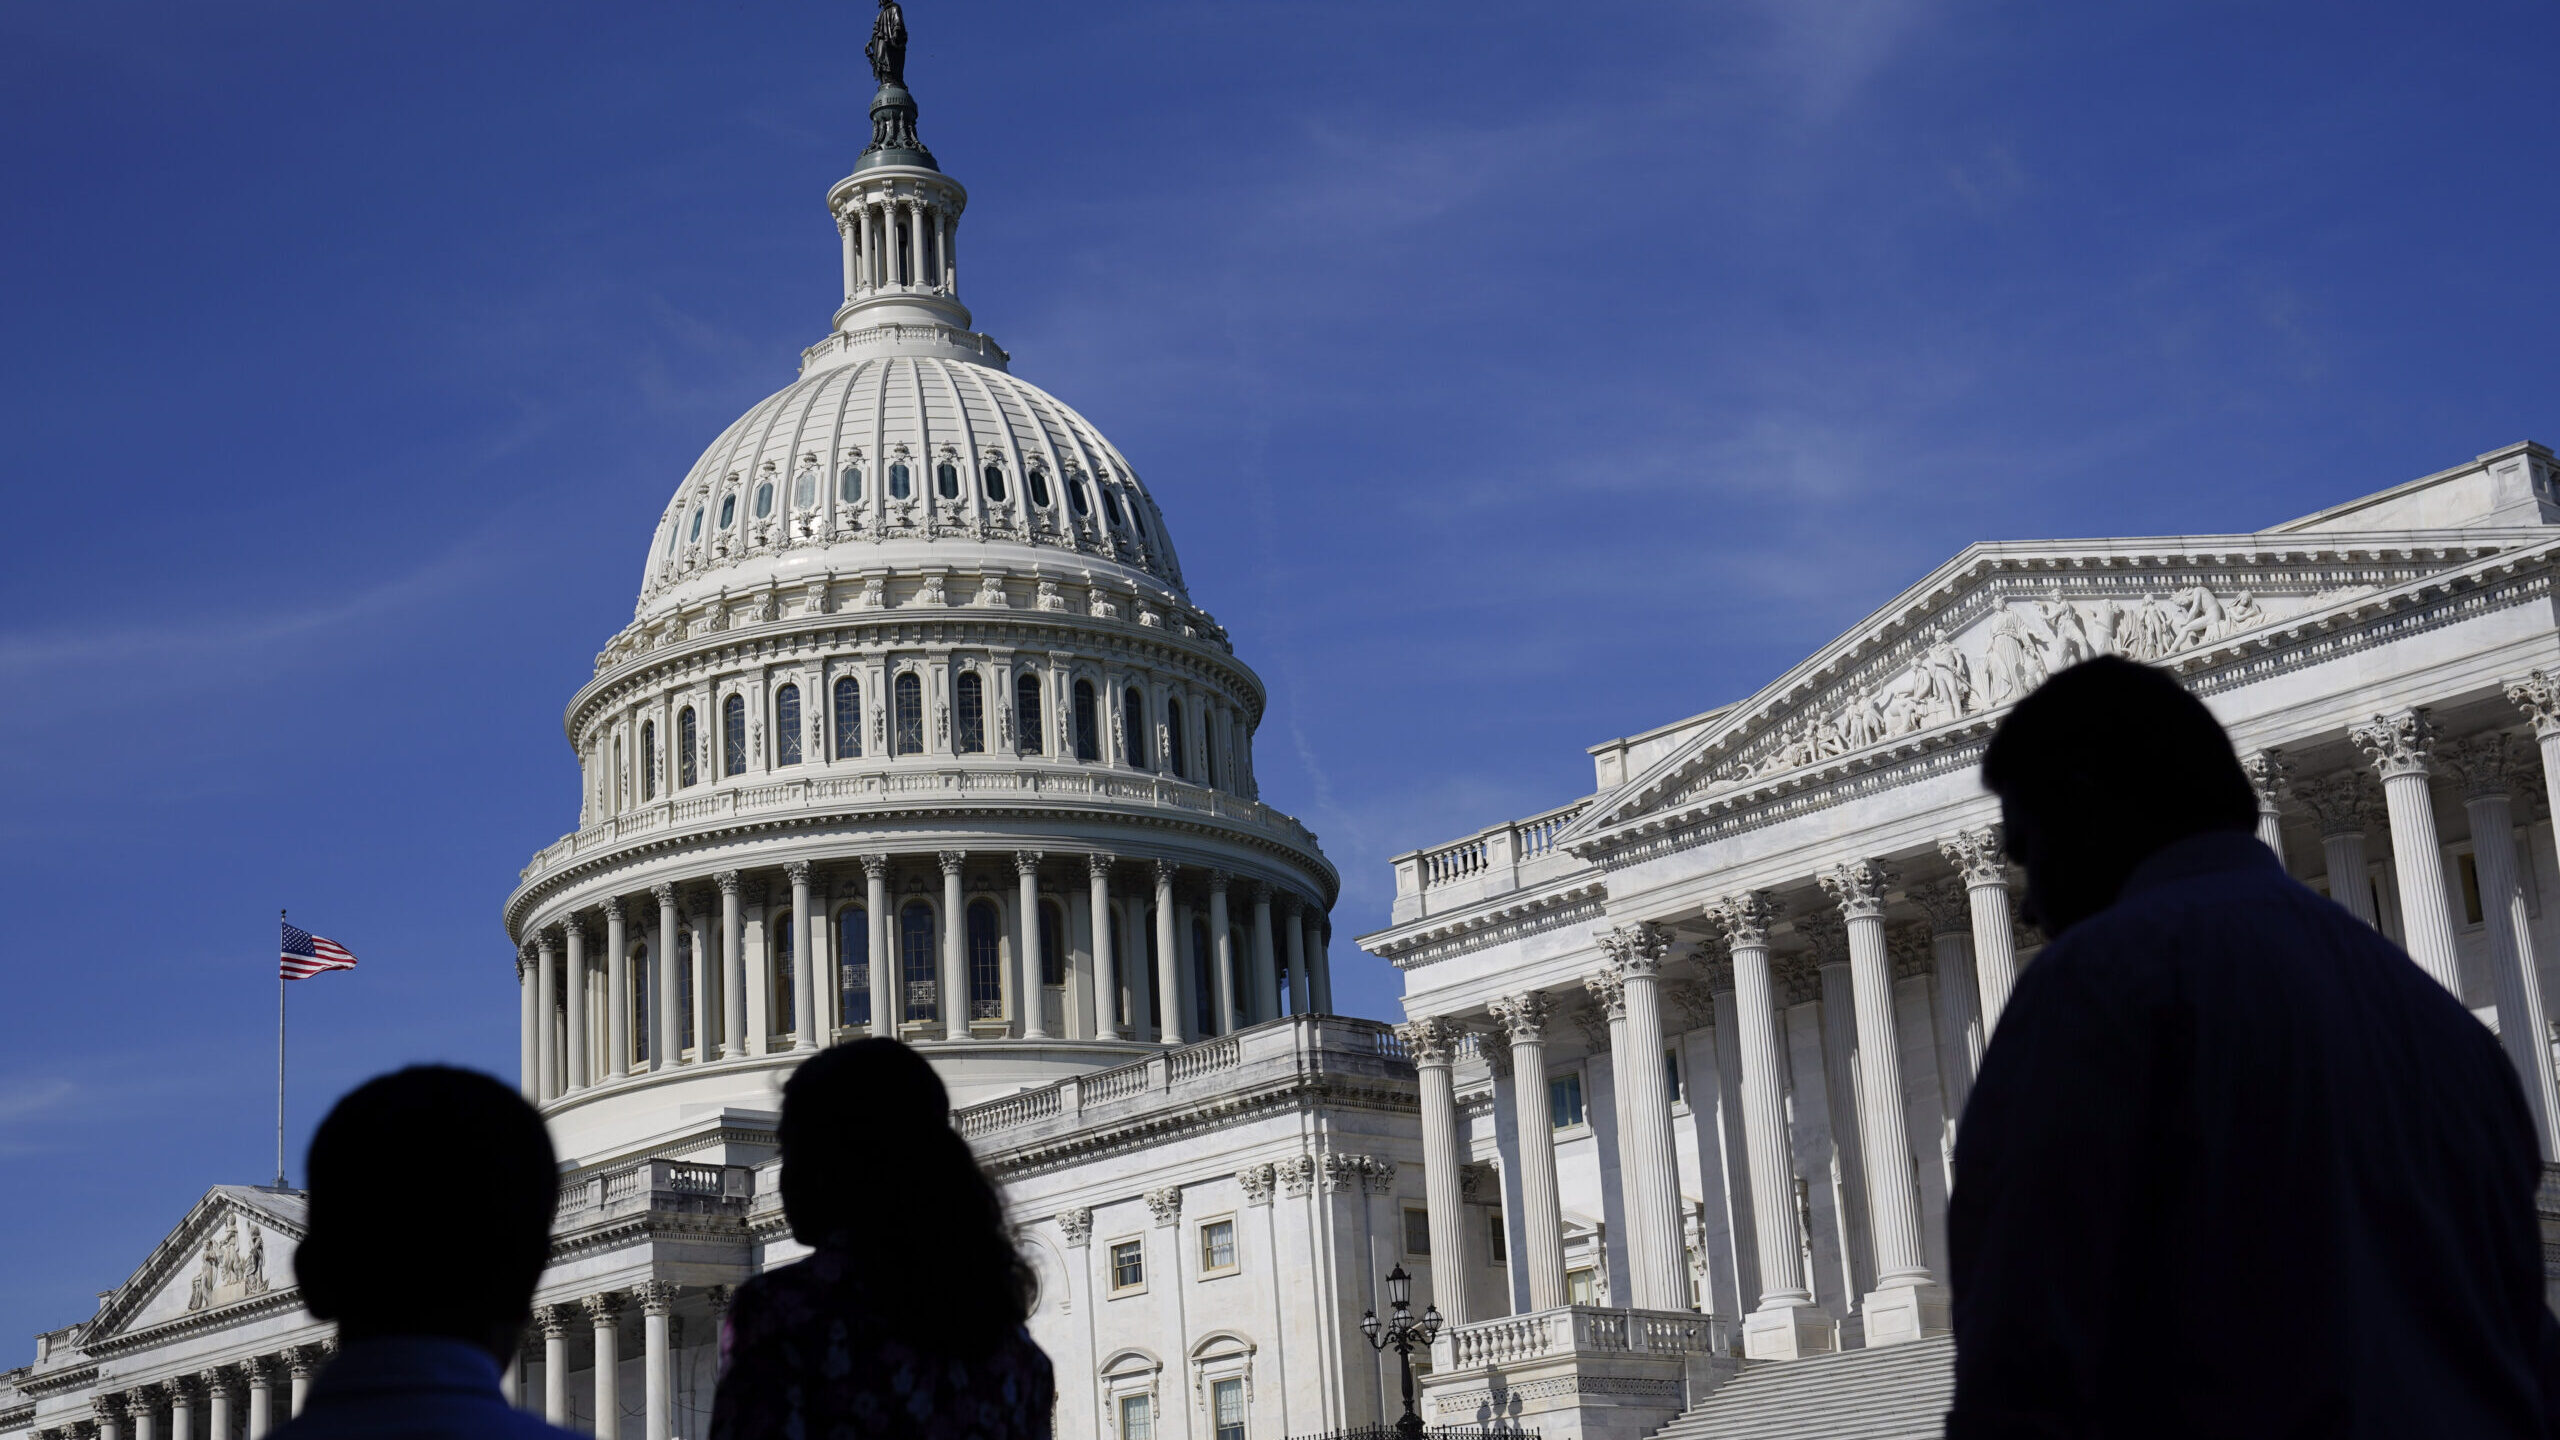 us capitol shown, government shutdown deadline approaching...